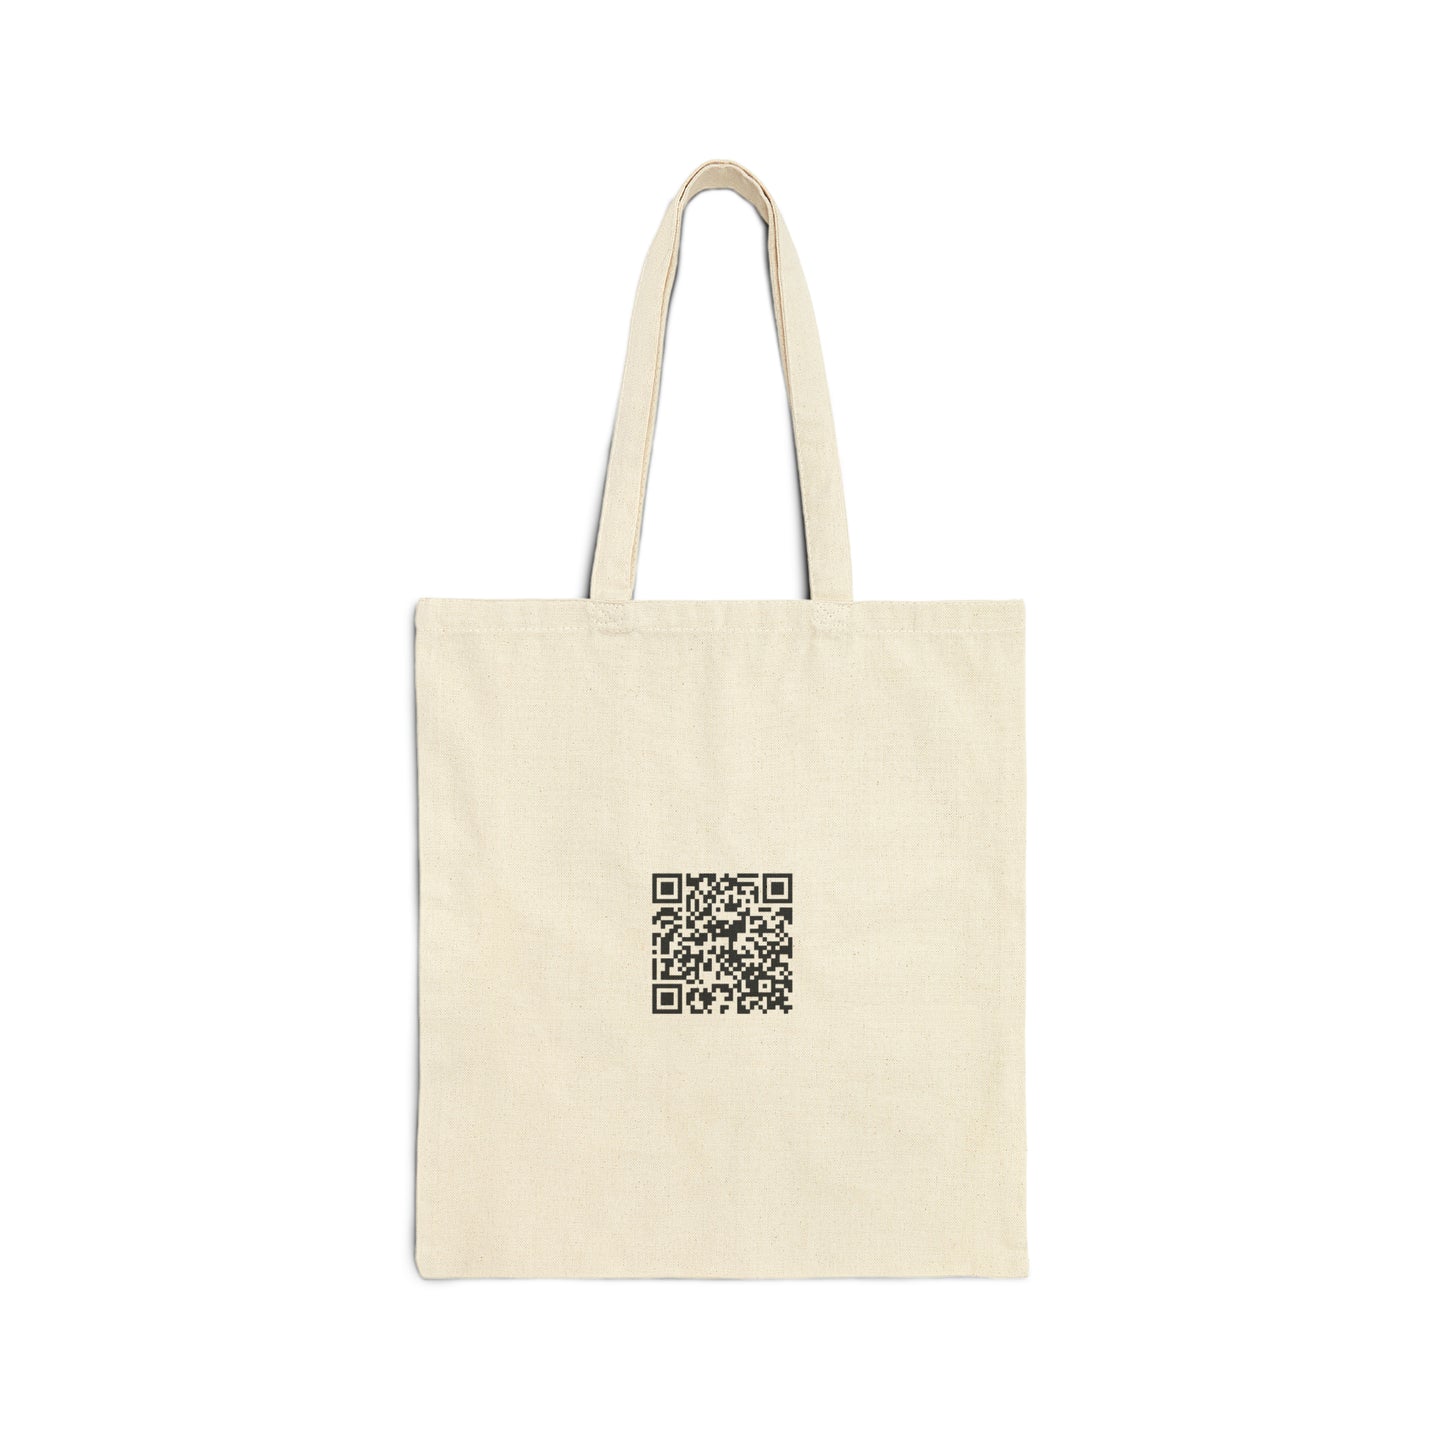 Disco's Dead and so is Mo-Mo - Cotton Canvas Tote Bag